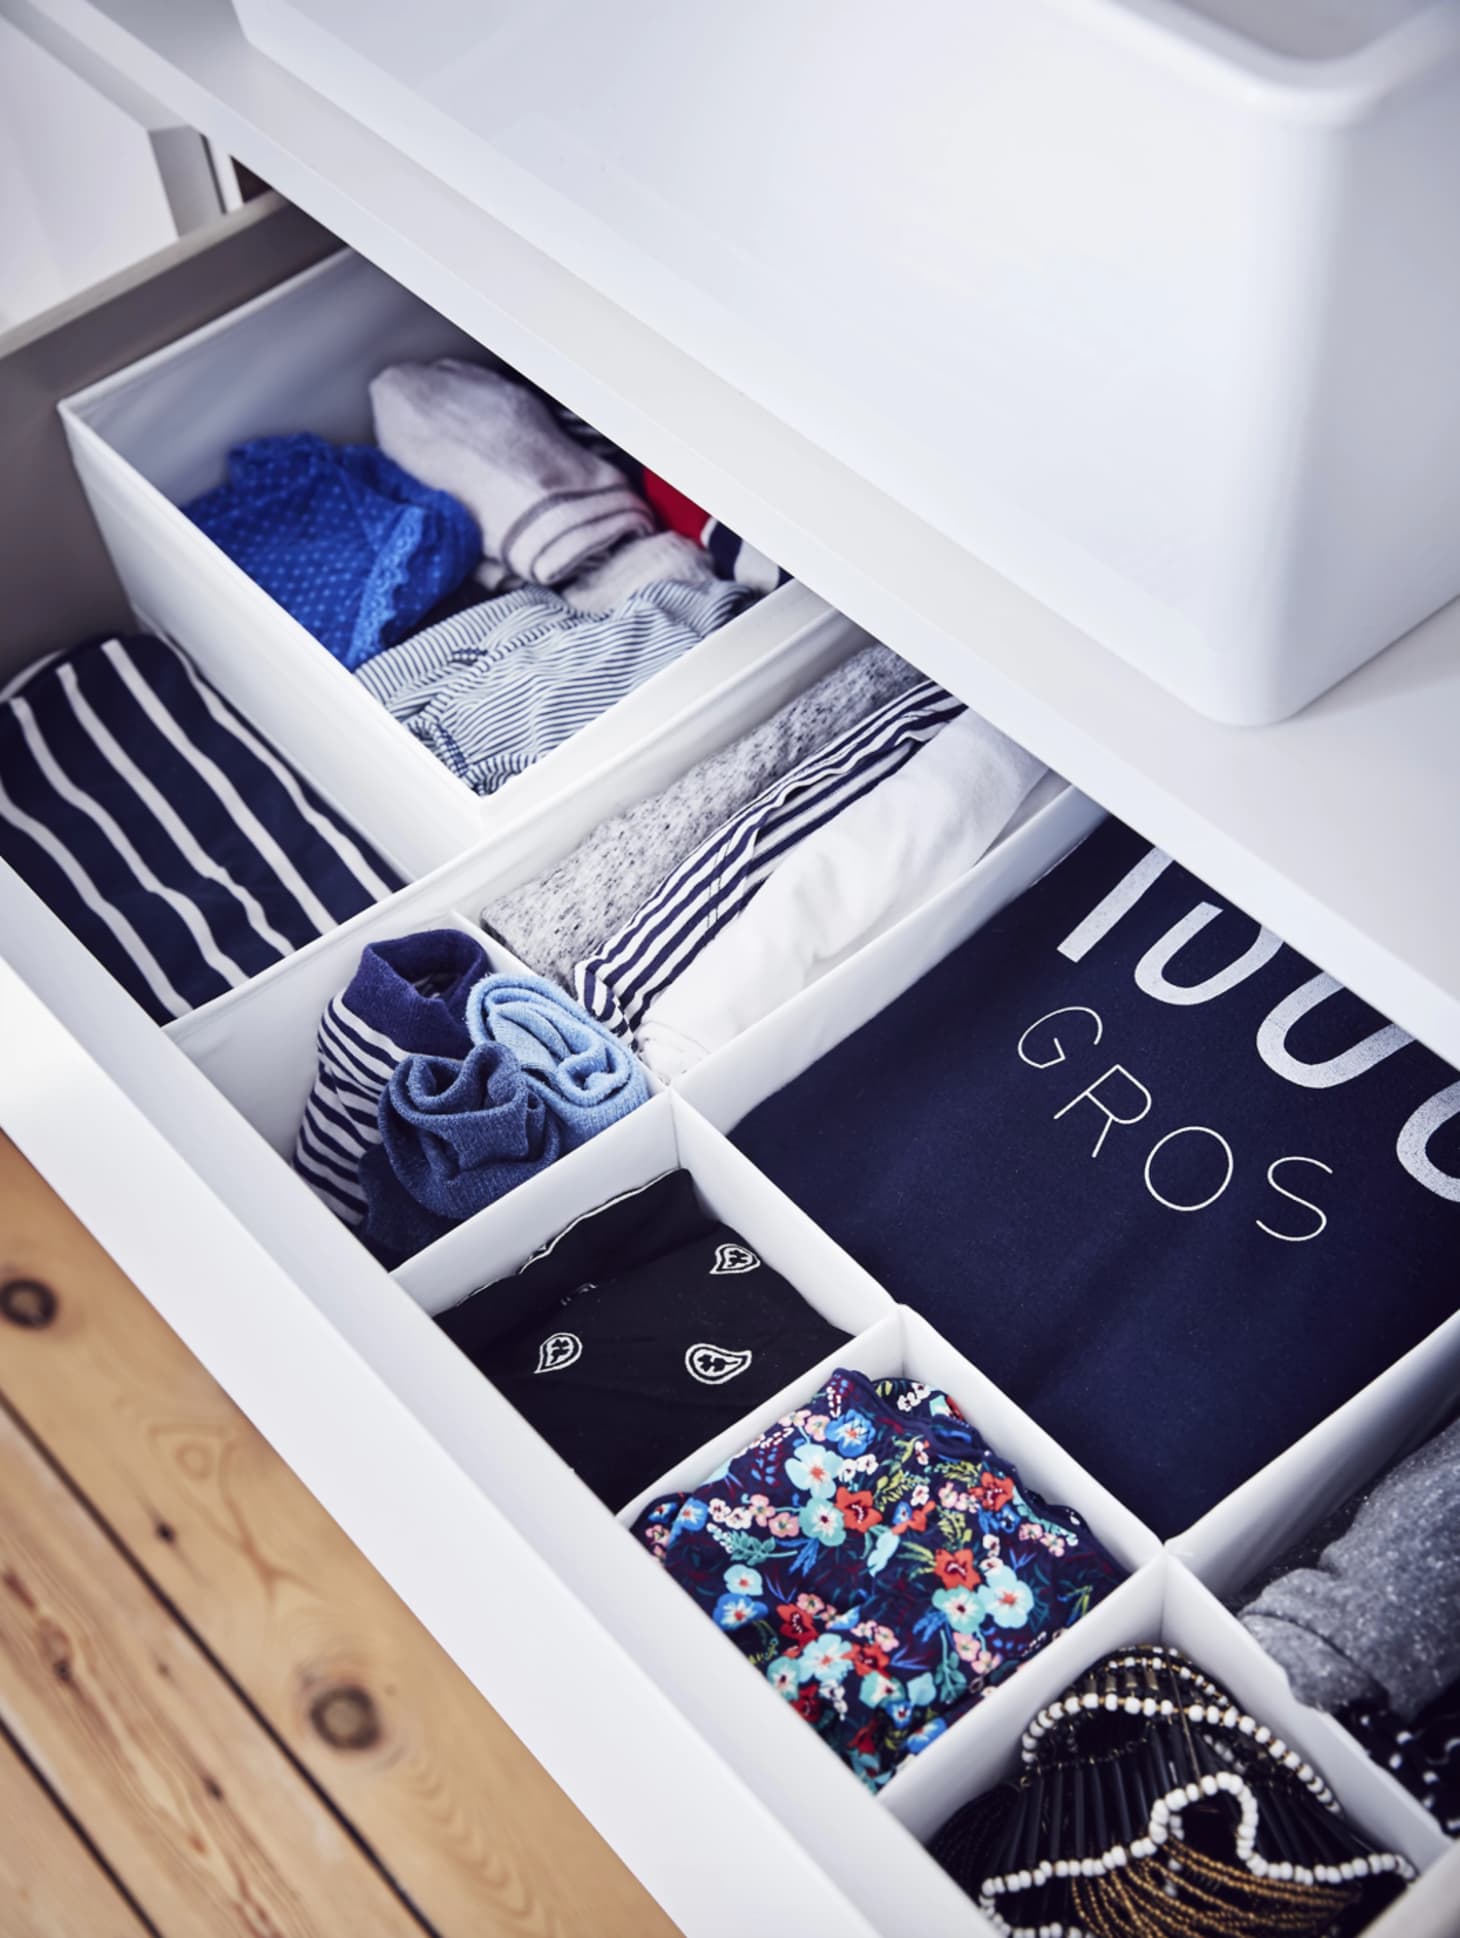 The Best IKEA Closet Organizers and Hacks | Apartment Therapy